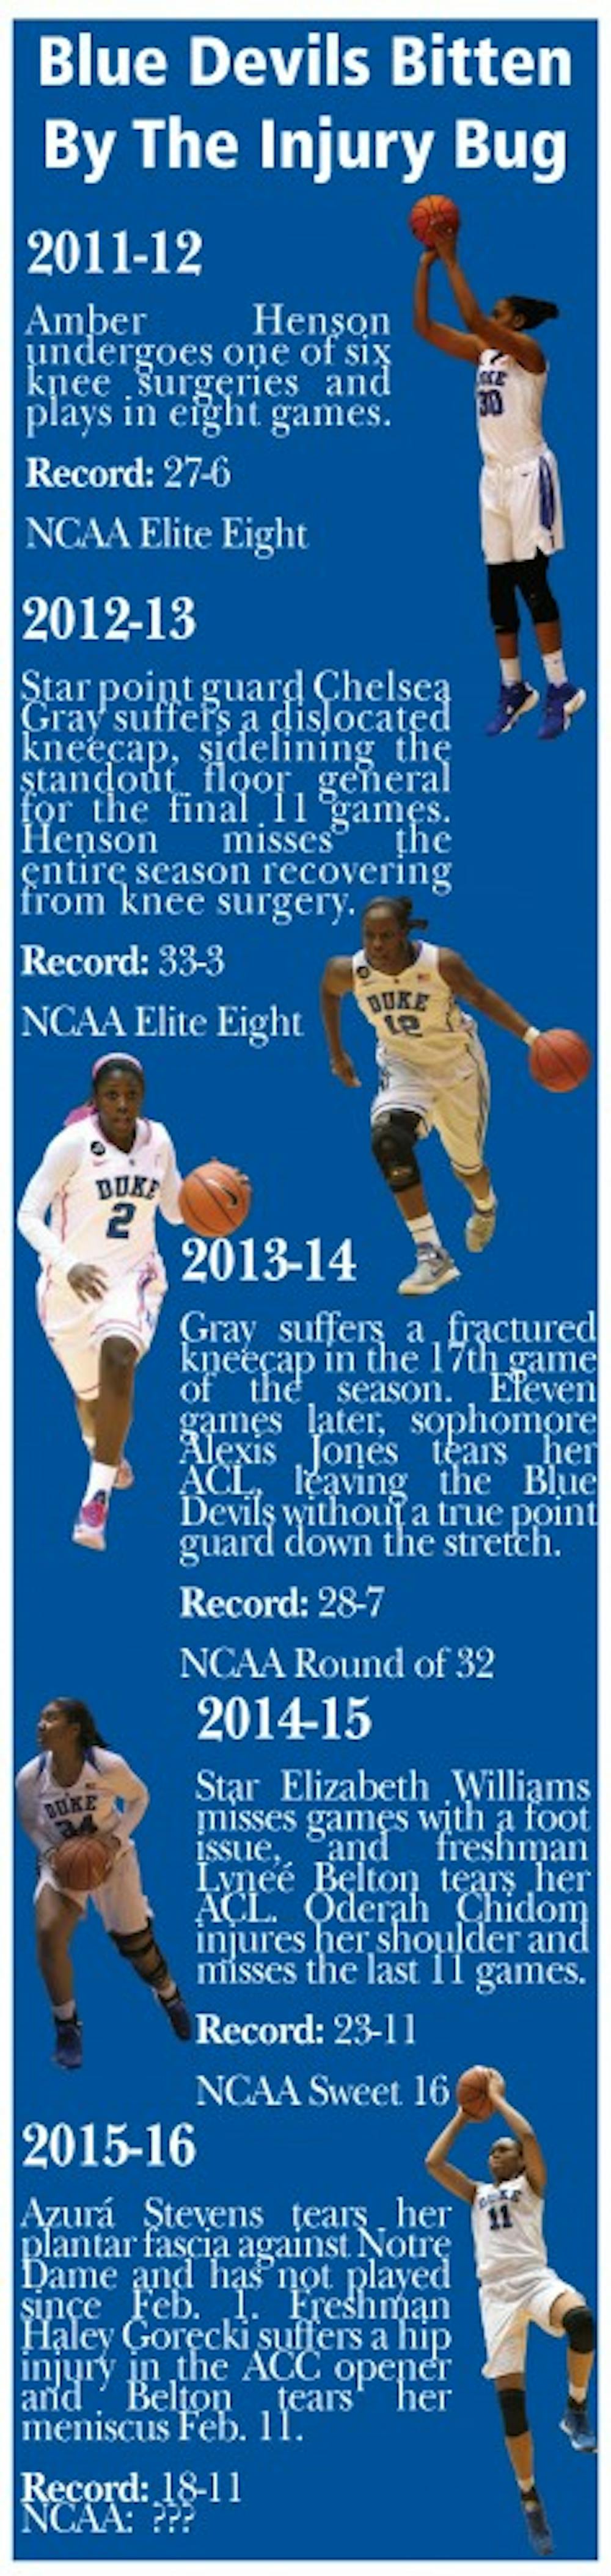 A look at some of the key injuries to stars&nbsp;that have plagued the Blue Devils in recent years.